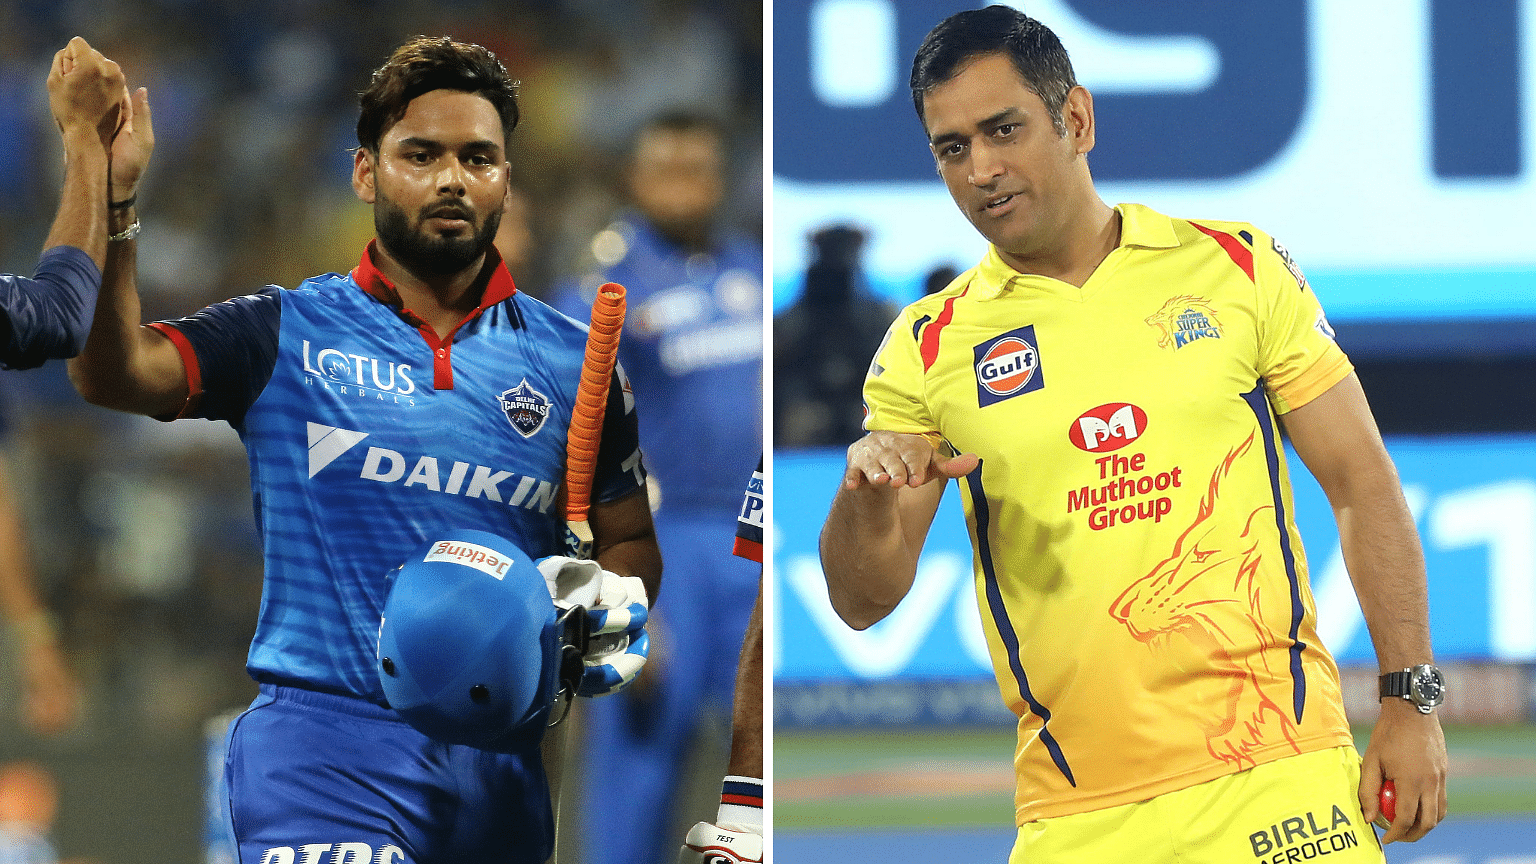 The average age of Delhi Capitals is 27 while for Chennai Super Kings it shoots up to 34.